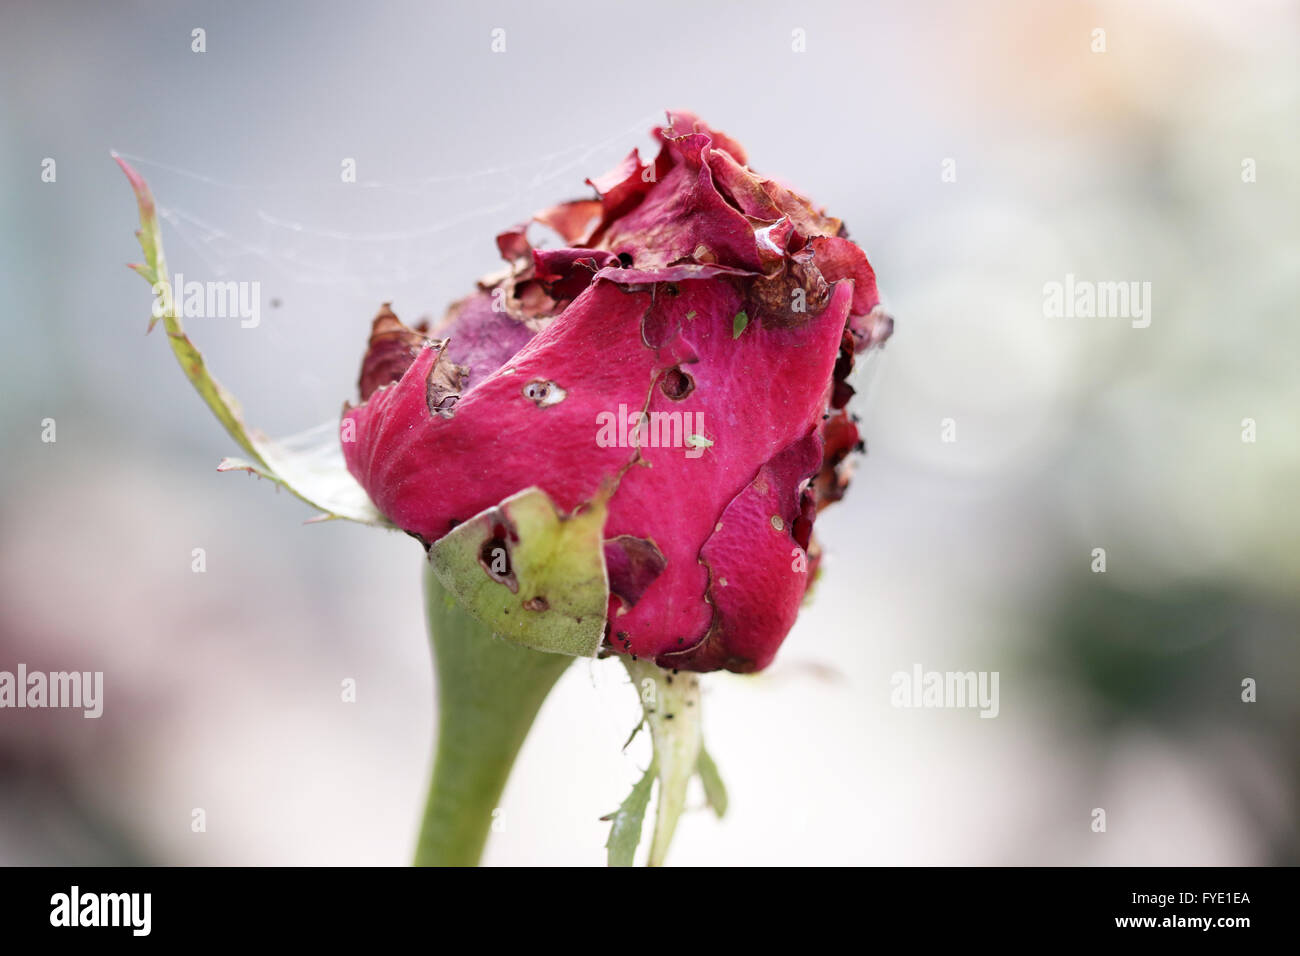 Close up shot of red rosebud  affected by pests Stock Photo